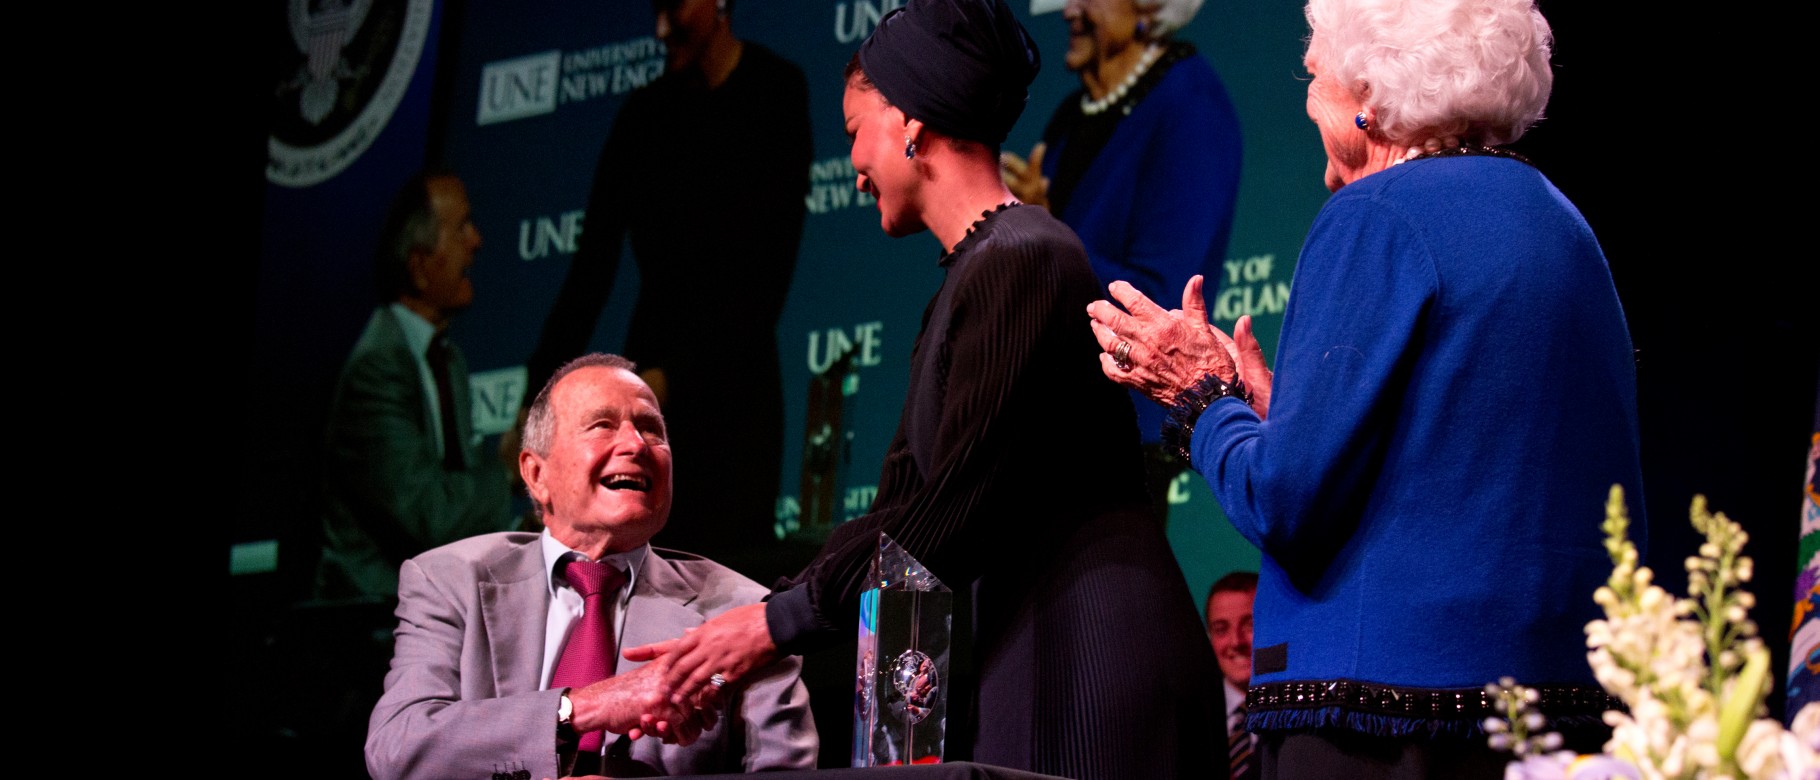 President and Mrs. Bush at the George and Barbara Bush Distinguished Lecture in 2013